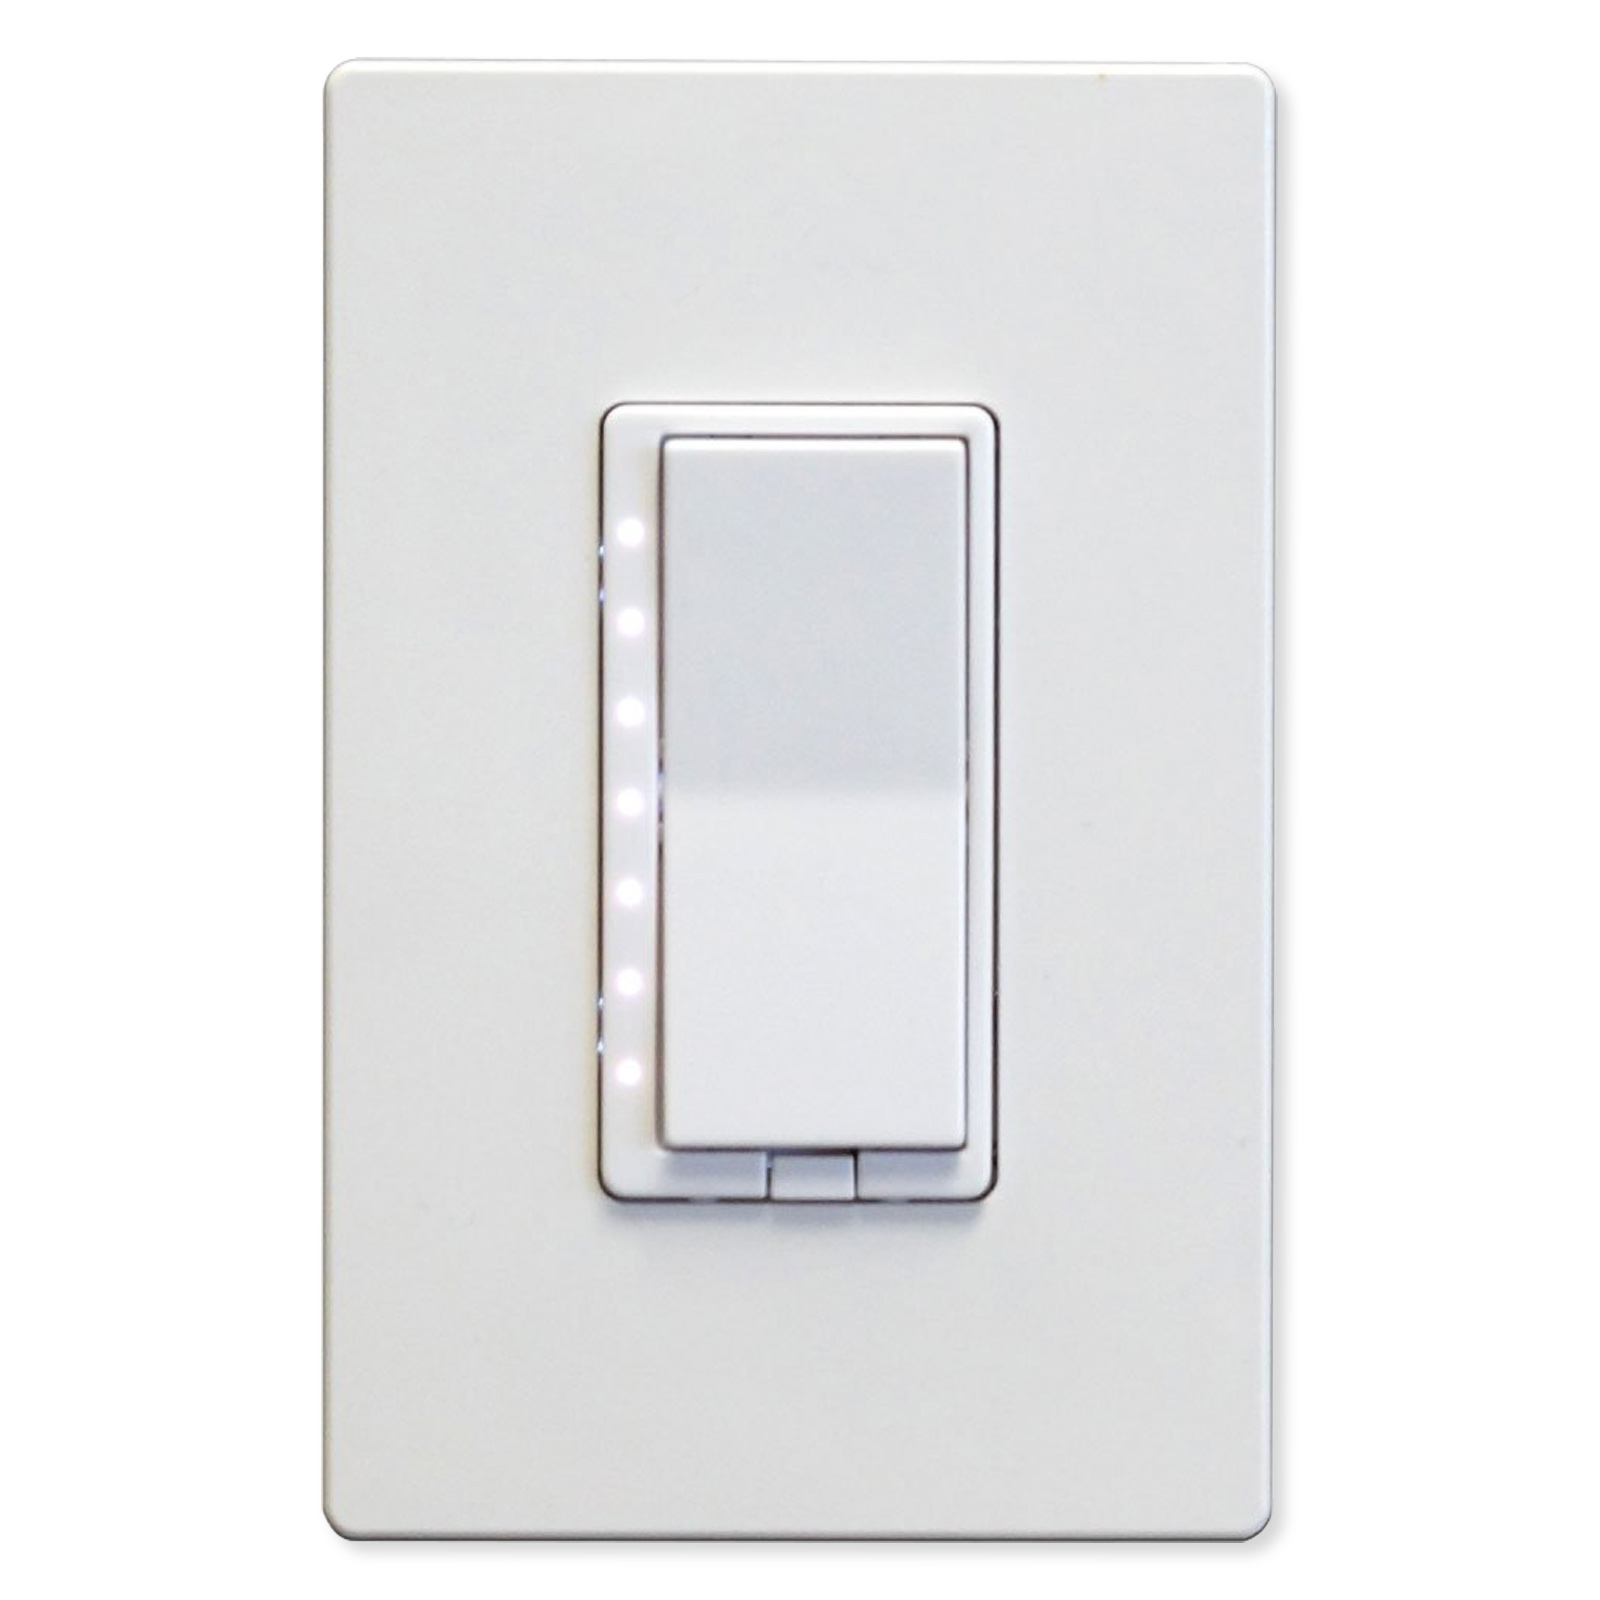 Plus Scene-Capable RGB Smart Dimmer & Switch